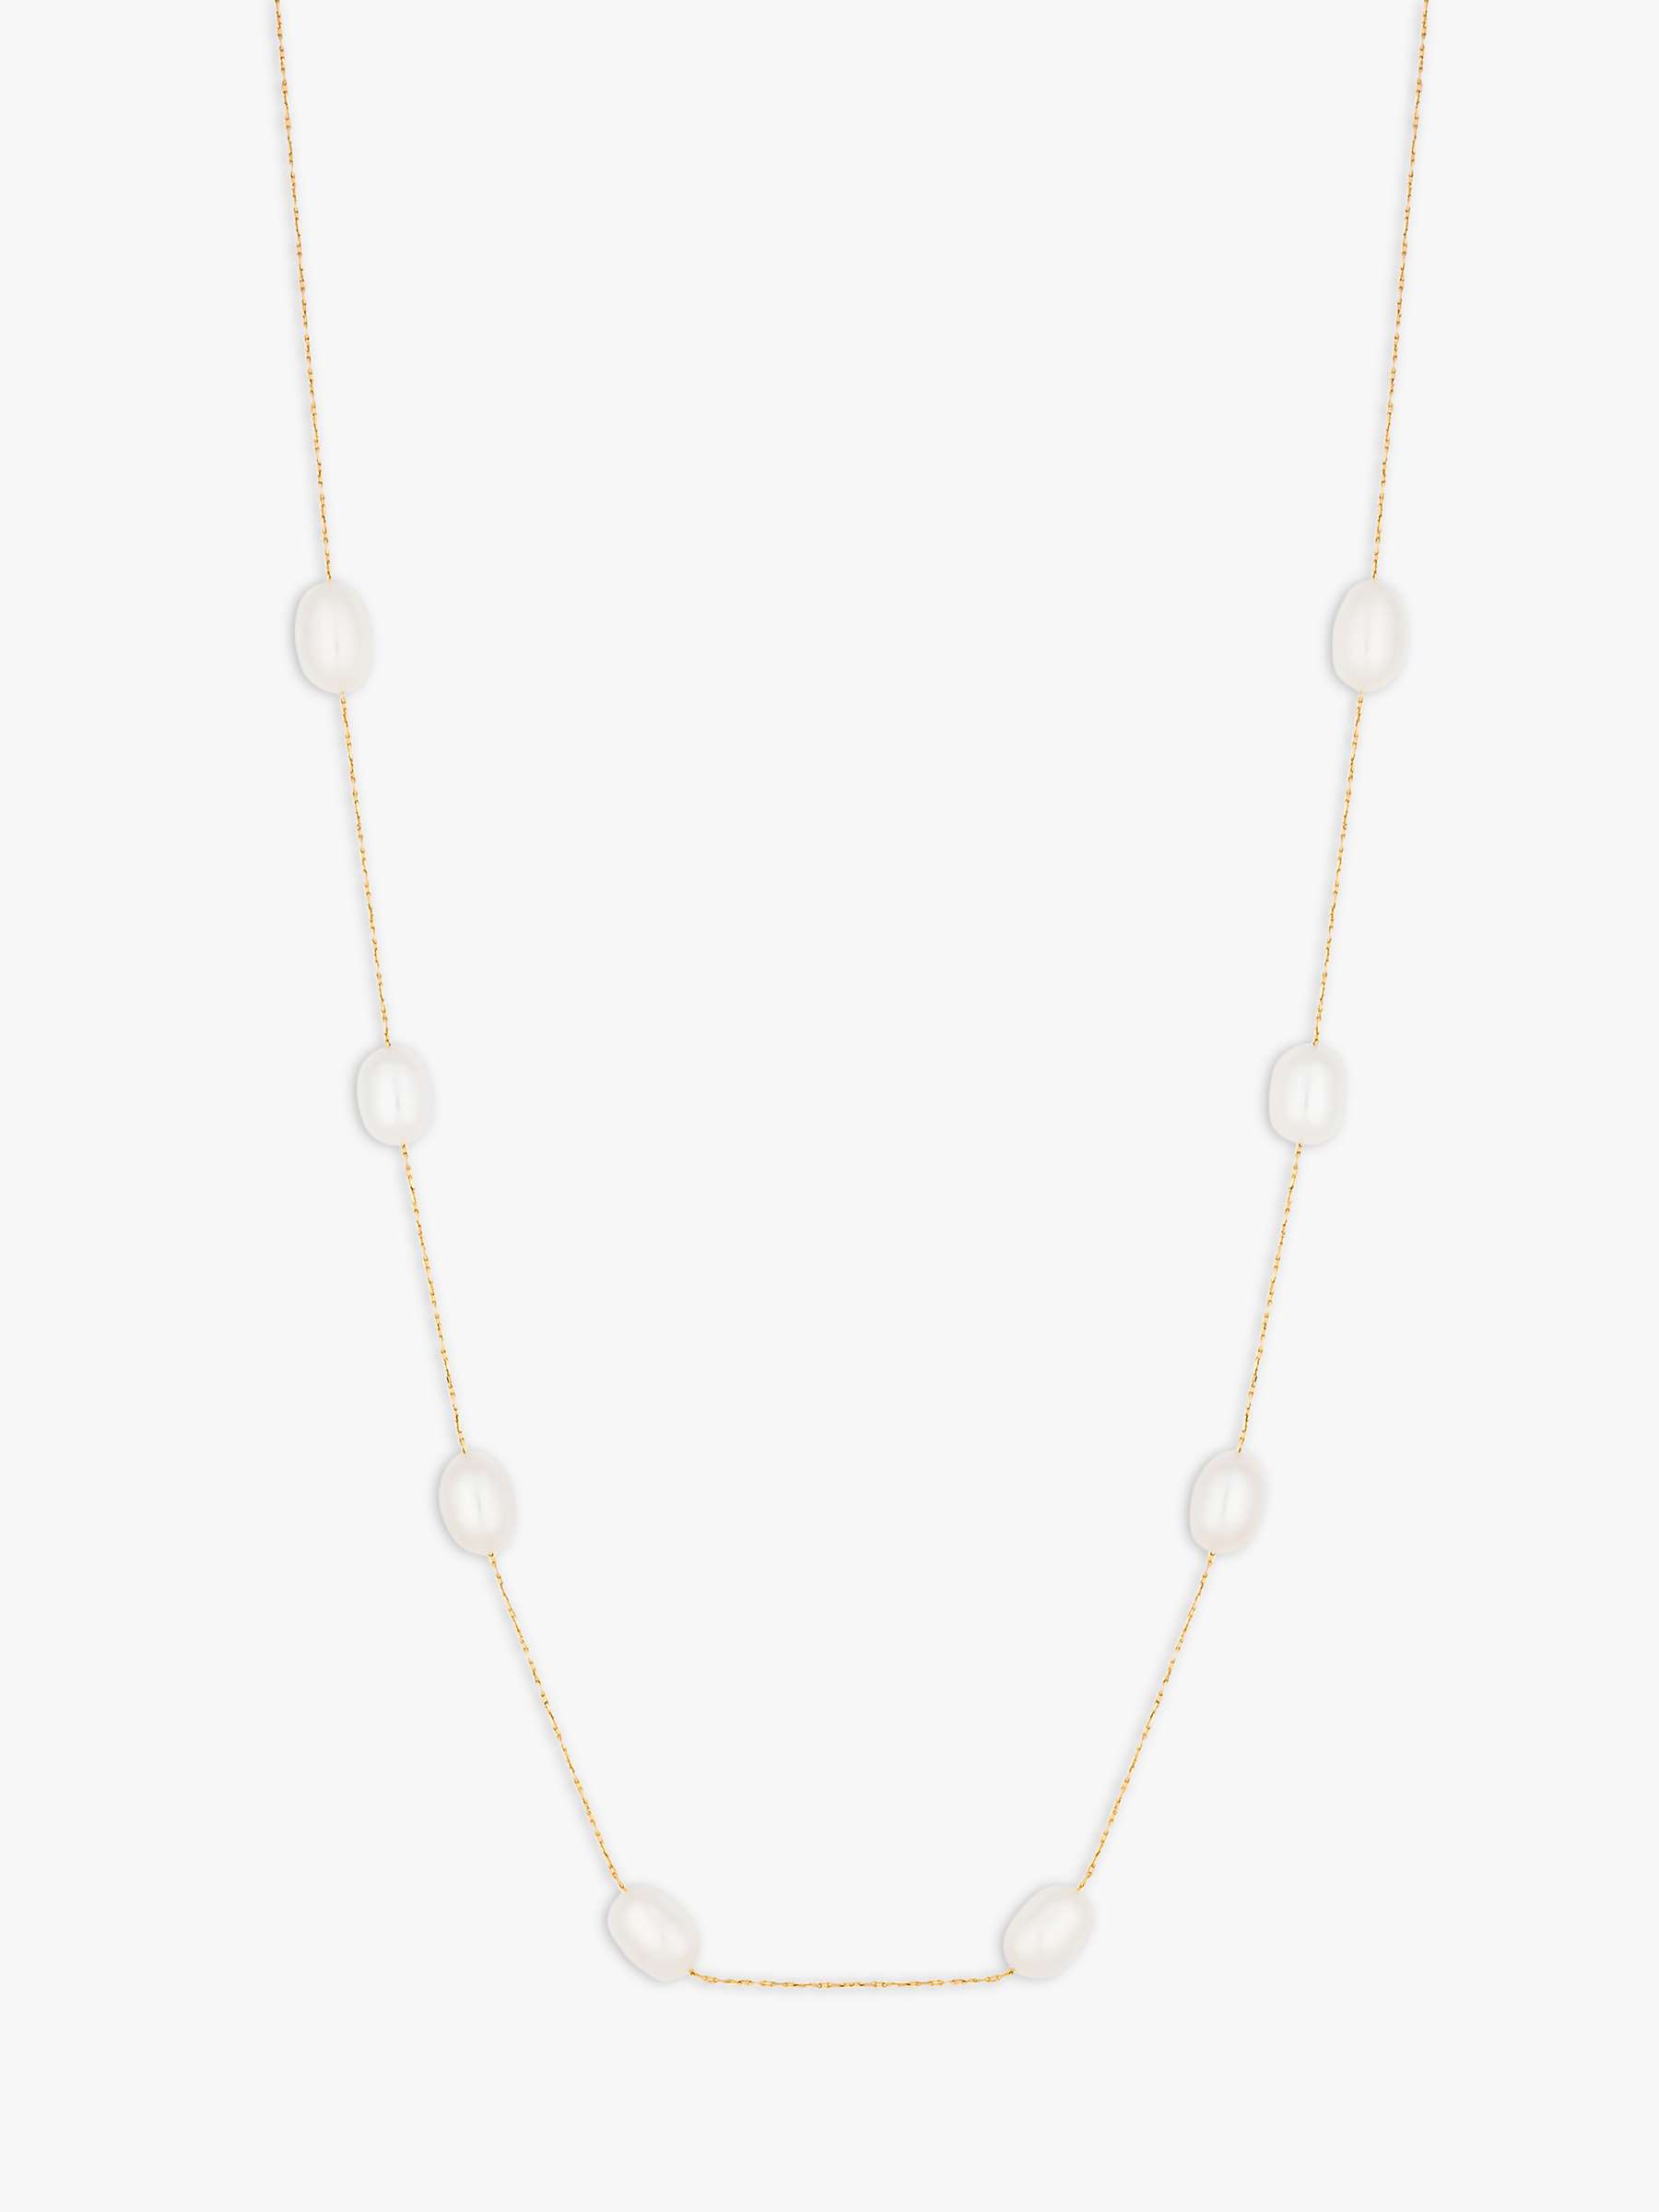 Buy Jon Richard Fine Chain And Freshwater Pearl Necklace, Gold Online at johnlewis.com